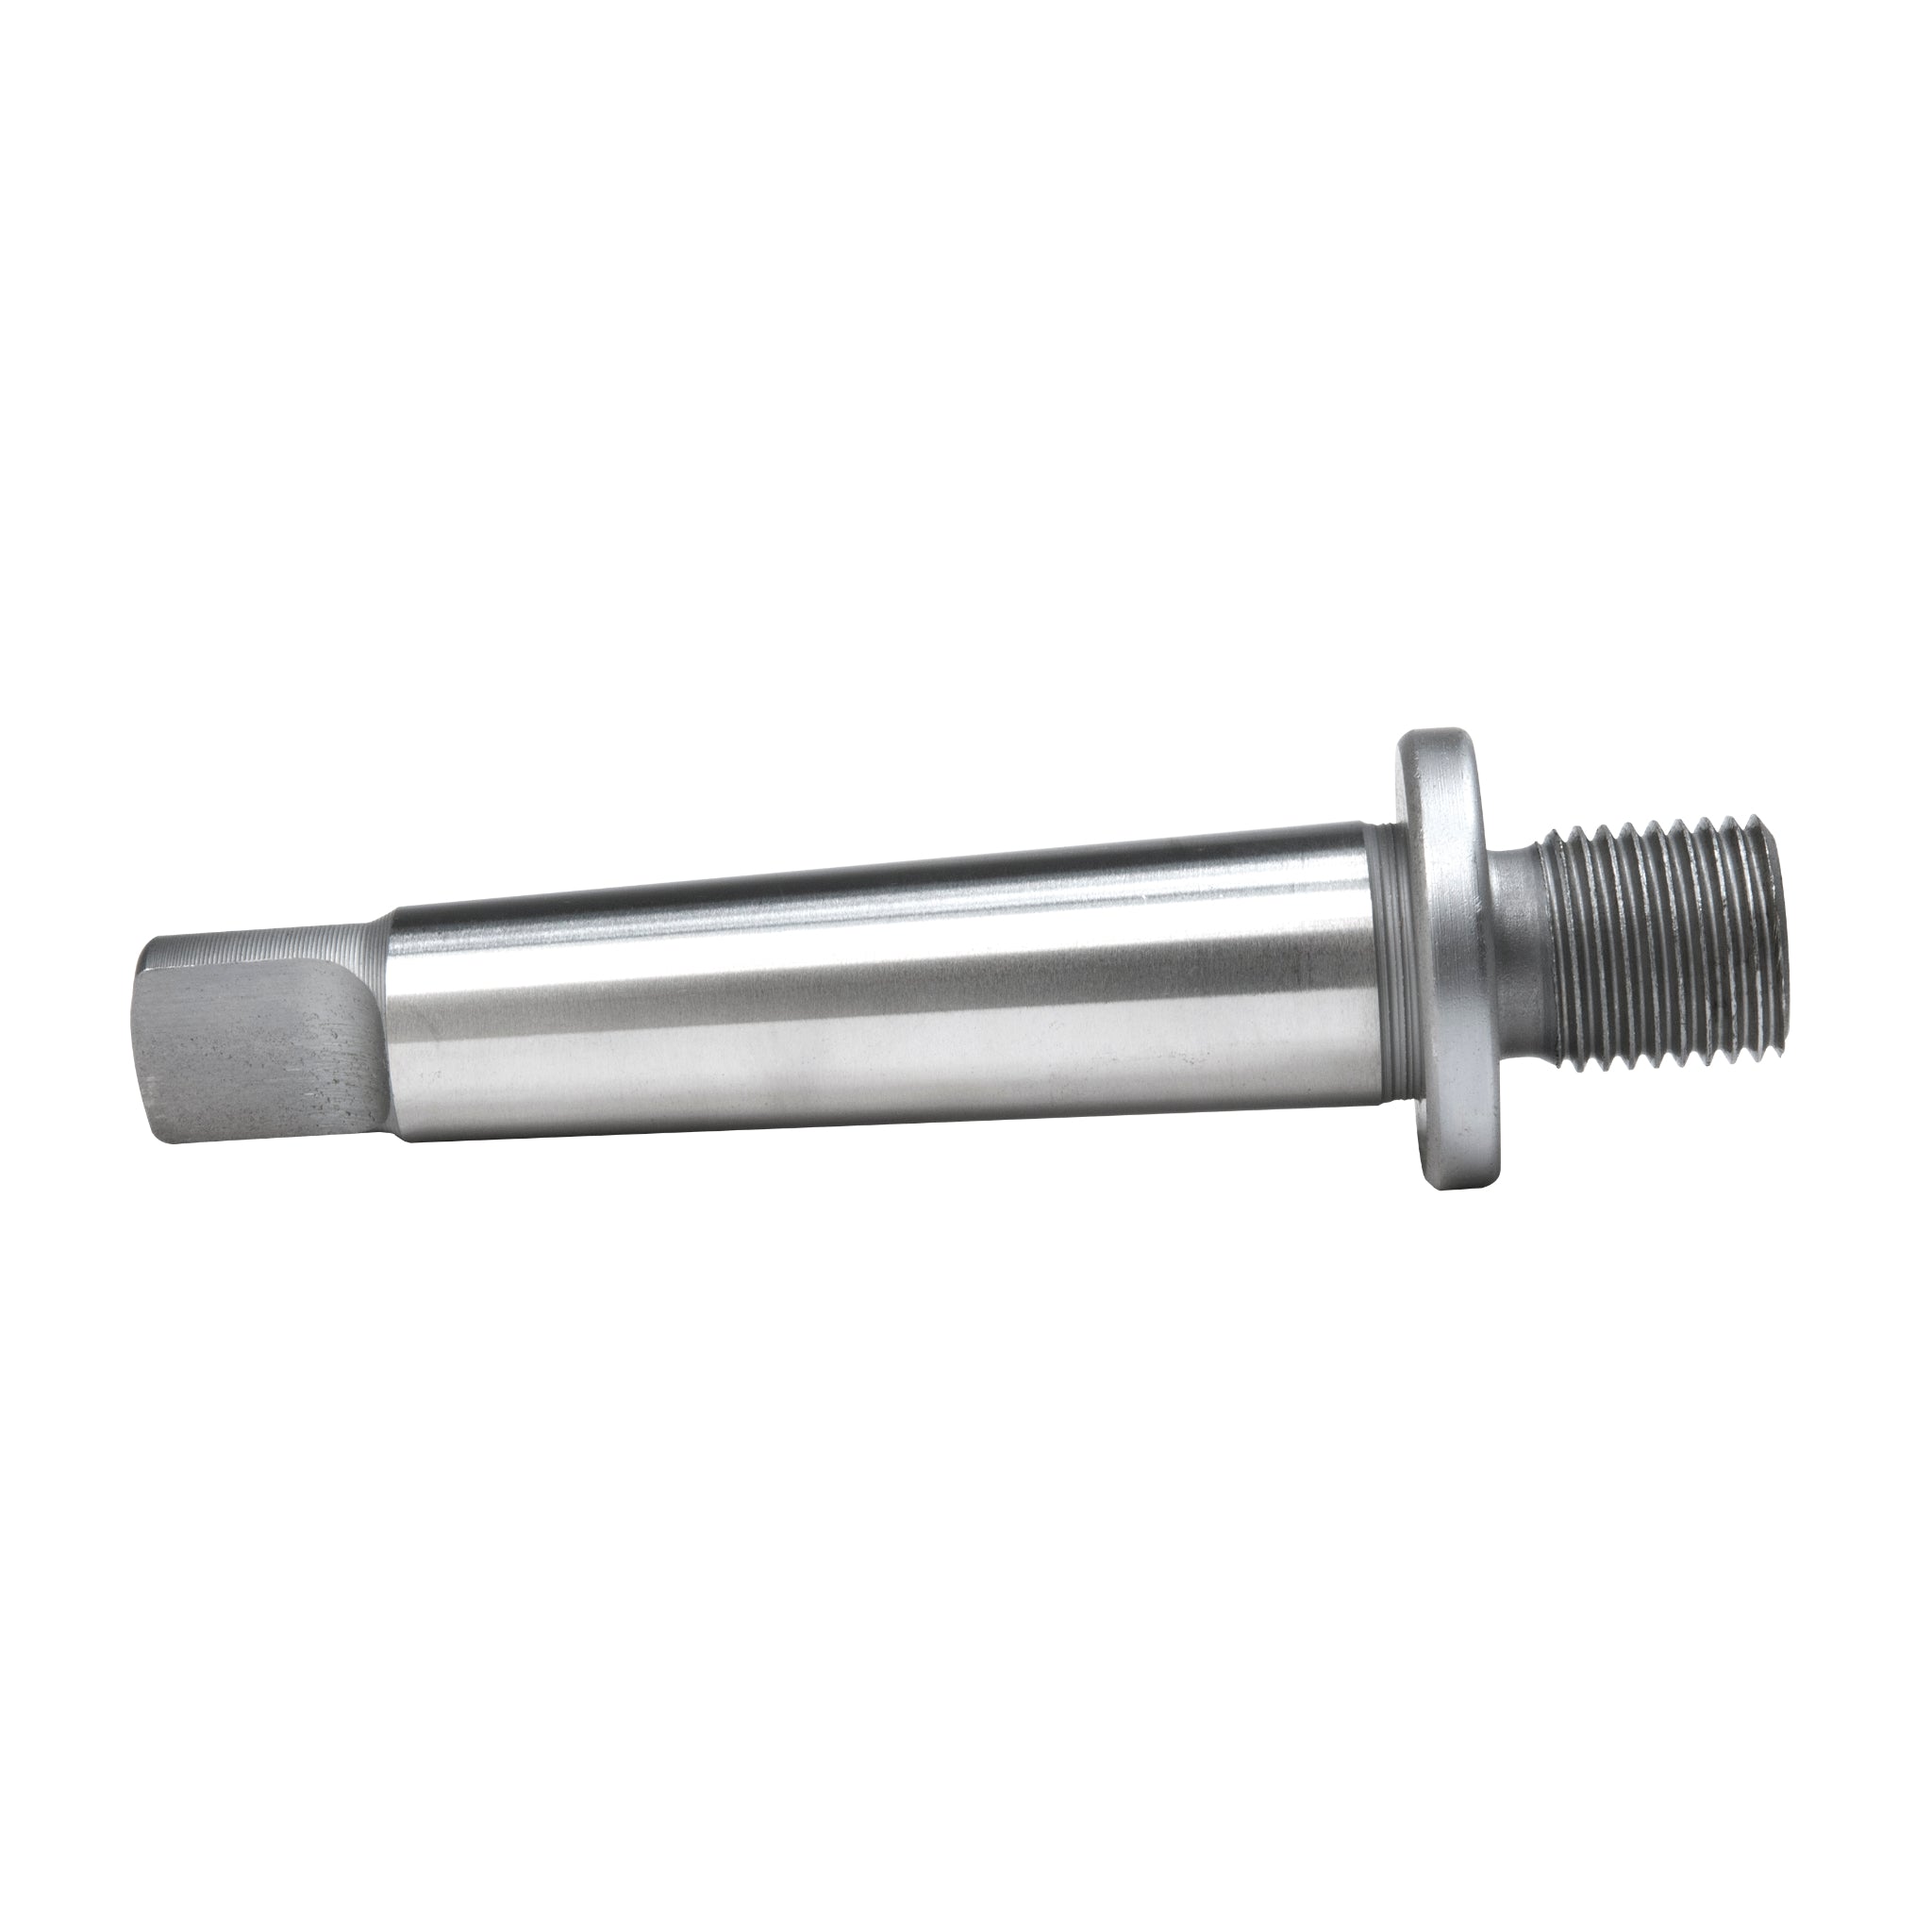 Chuck to Spindle Adapters for Hougen Mag Drills - 08821 - CelticMagDrills.ca